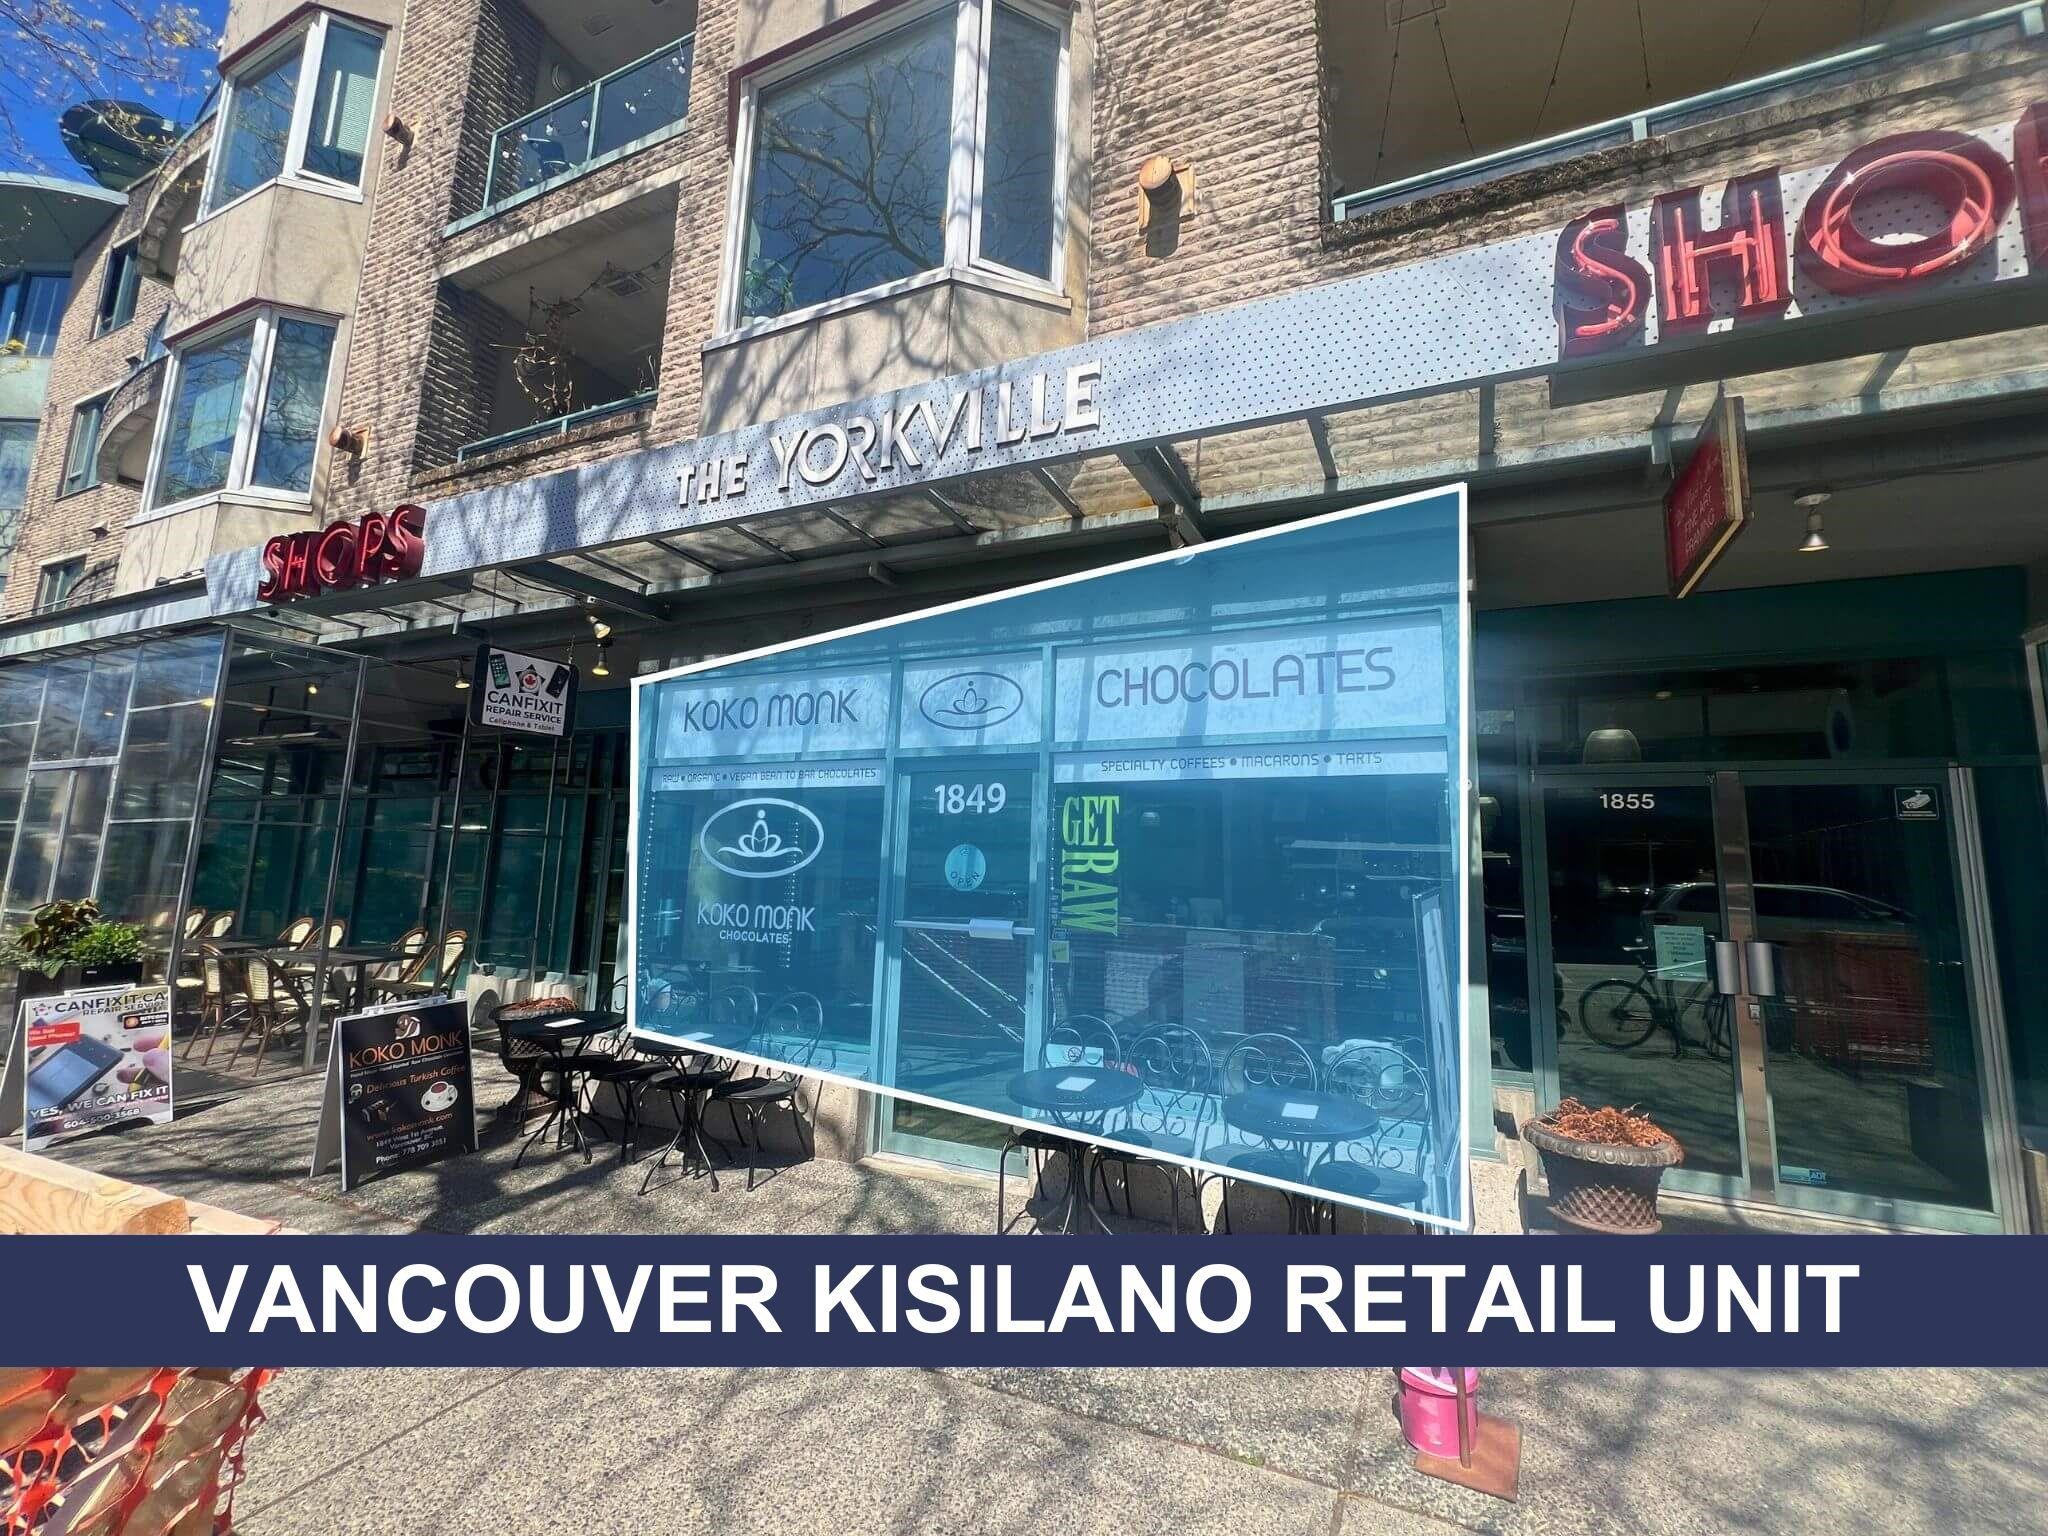 Kitsilano Land Commercial for sale:    (Listed 6800-05-15)